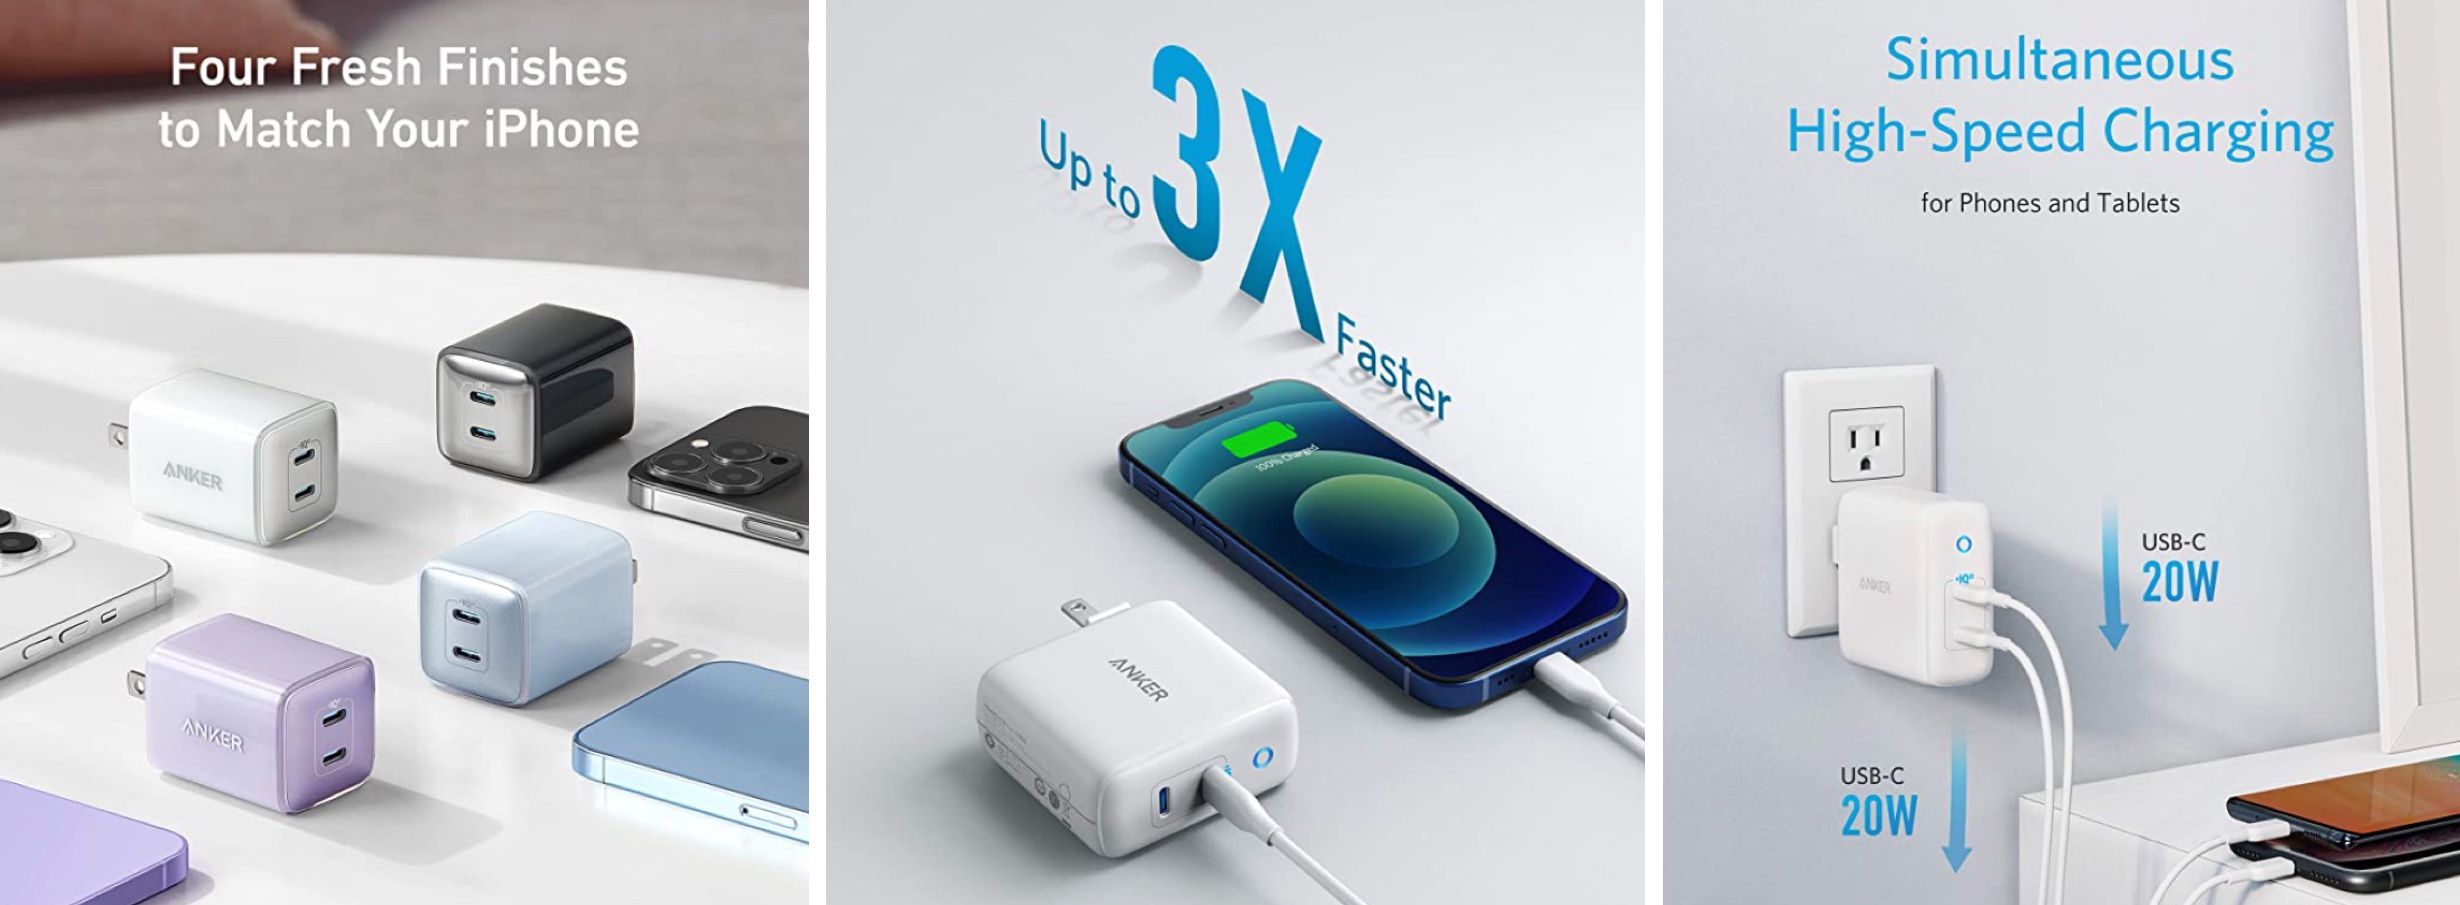 Deals: Anker Offers Cheaper Dual USB-C Charger Alternatives on Amazon,  Available From $ - MacRumors